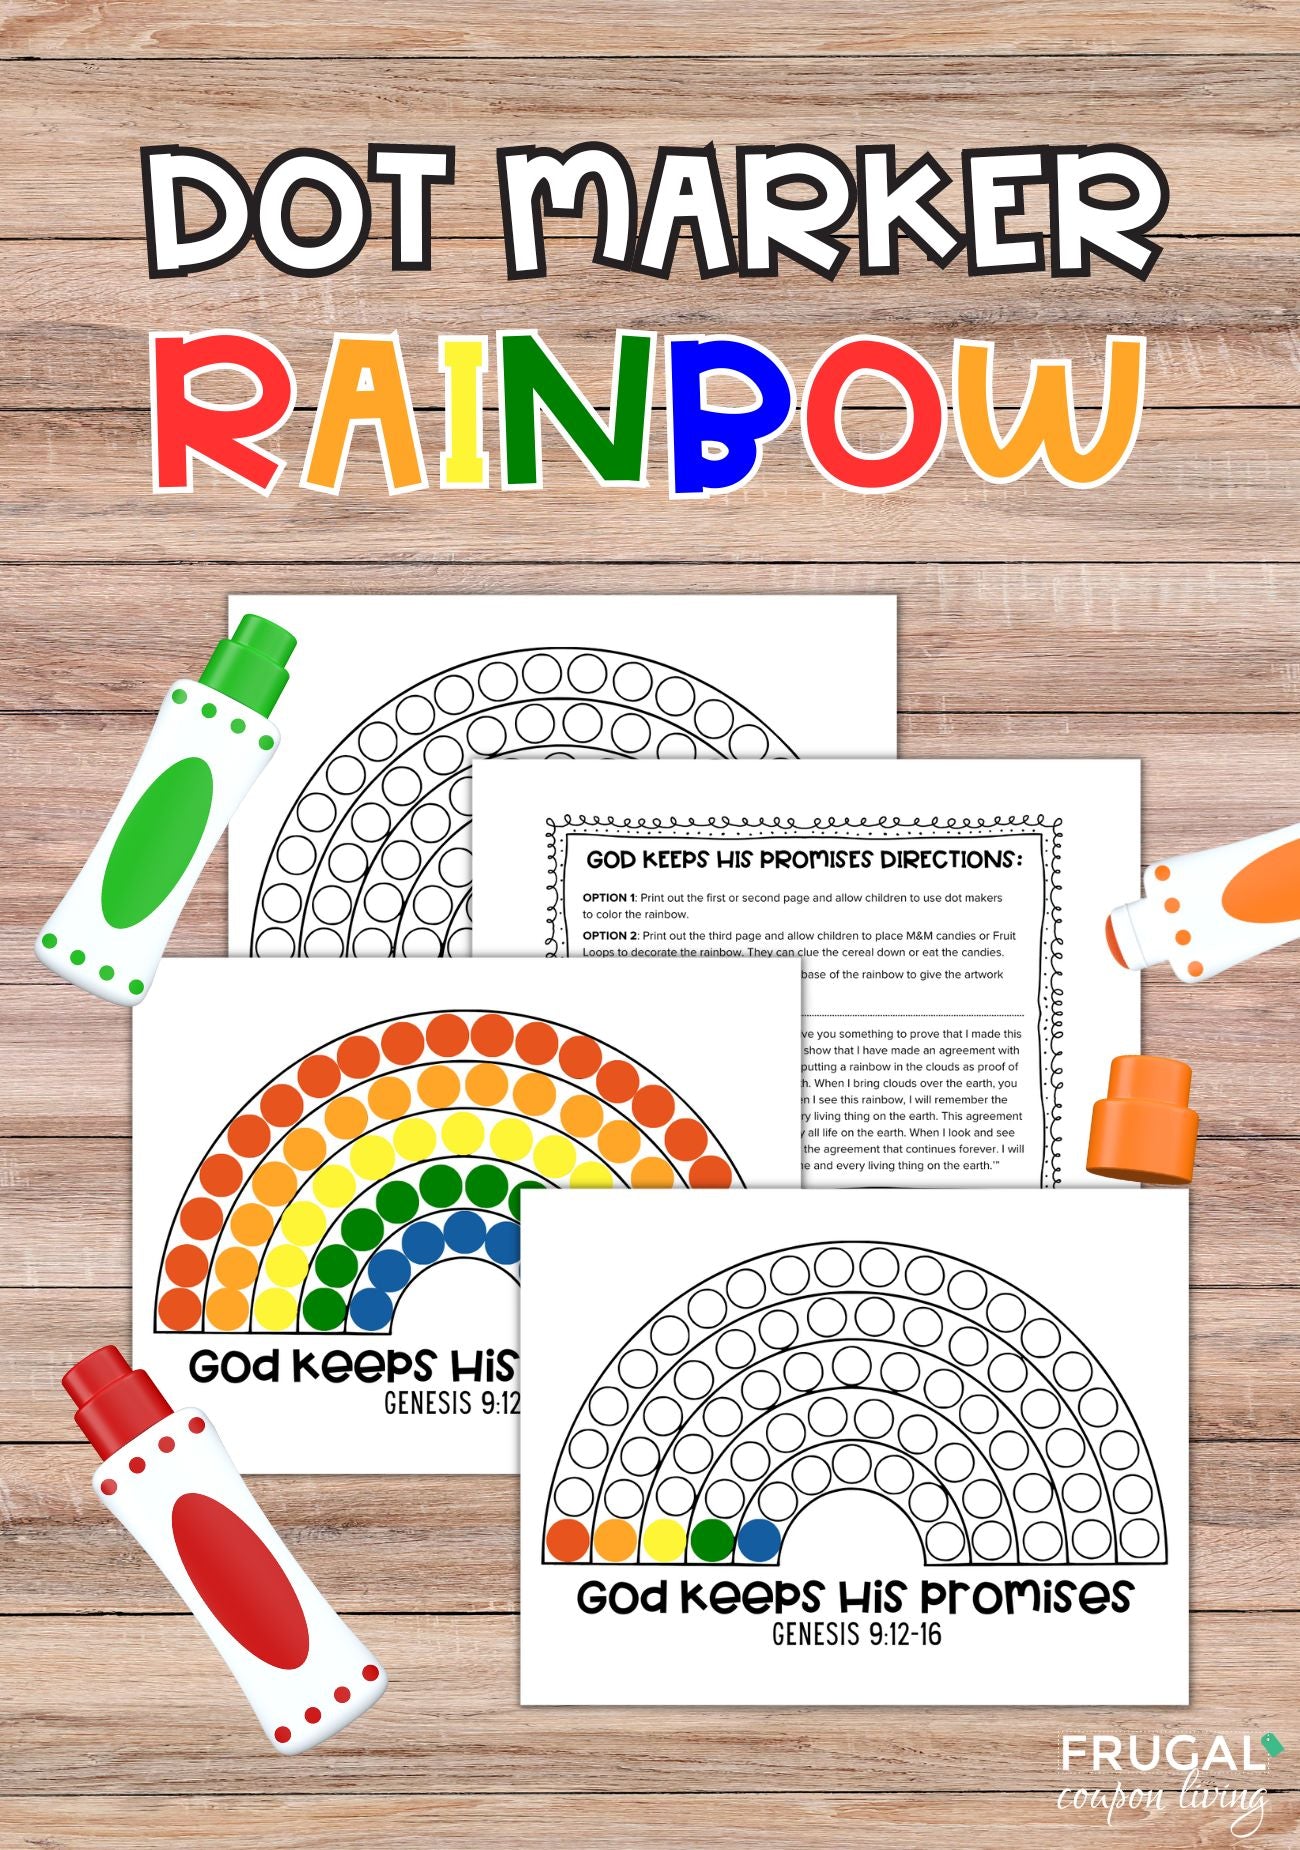 Gods promises rainbow dot marker activity for sunday school â frugal coupon living